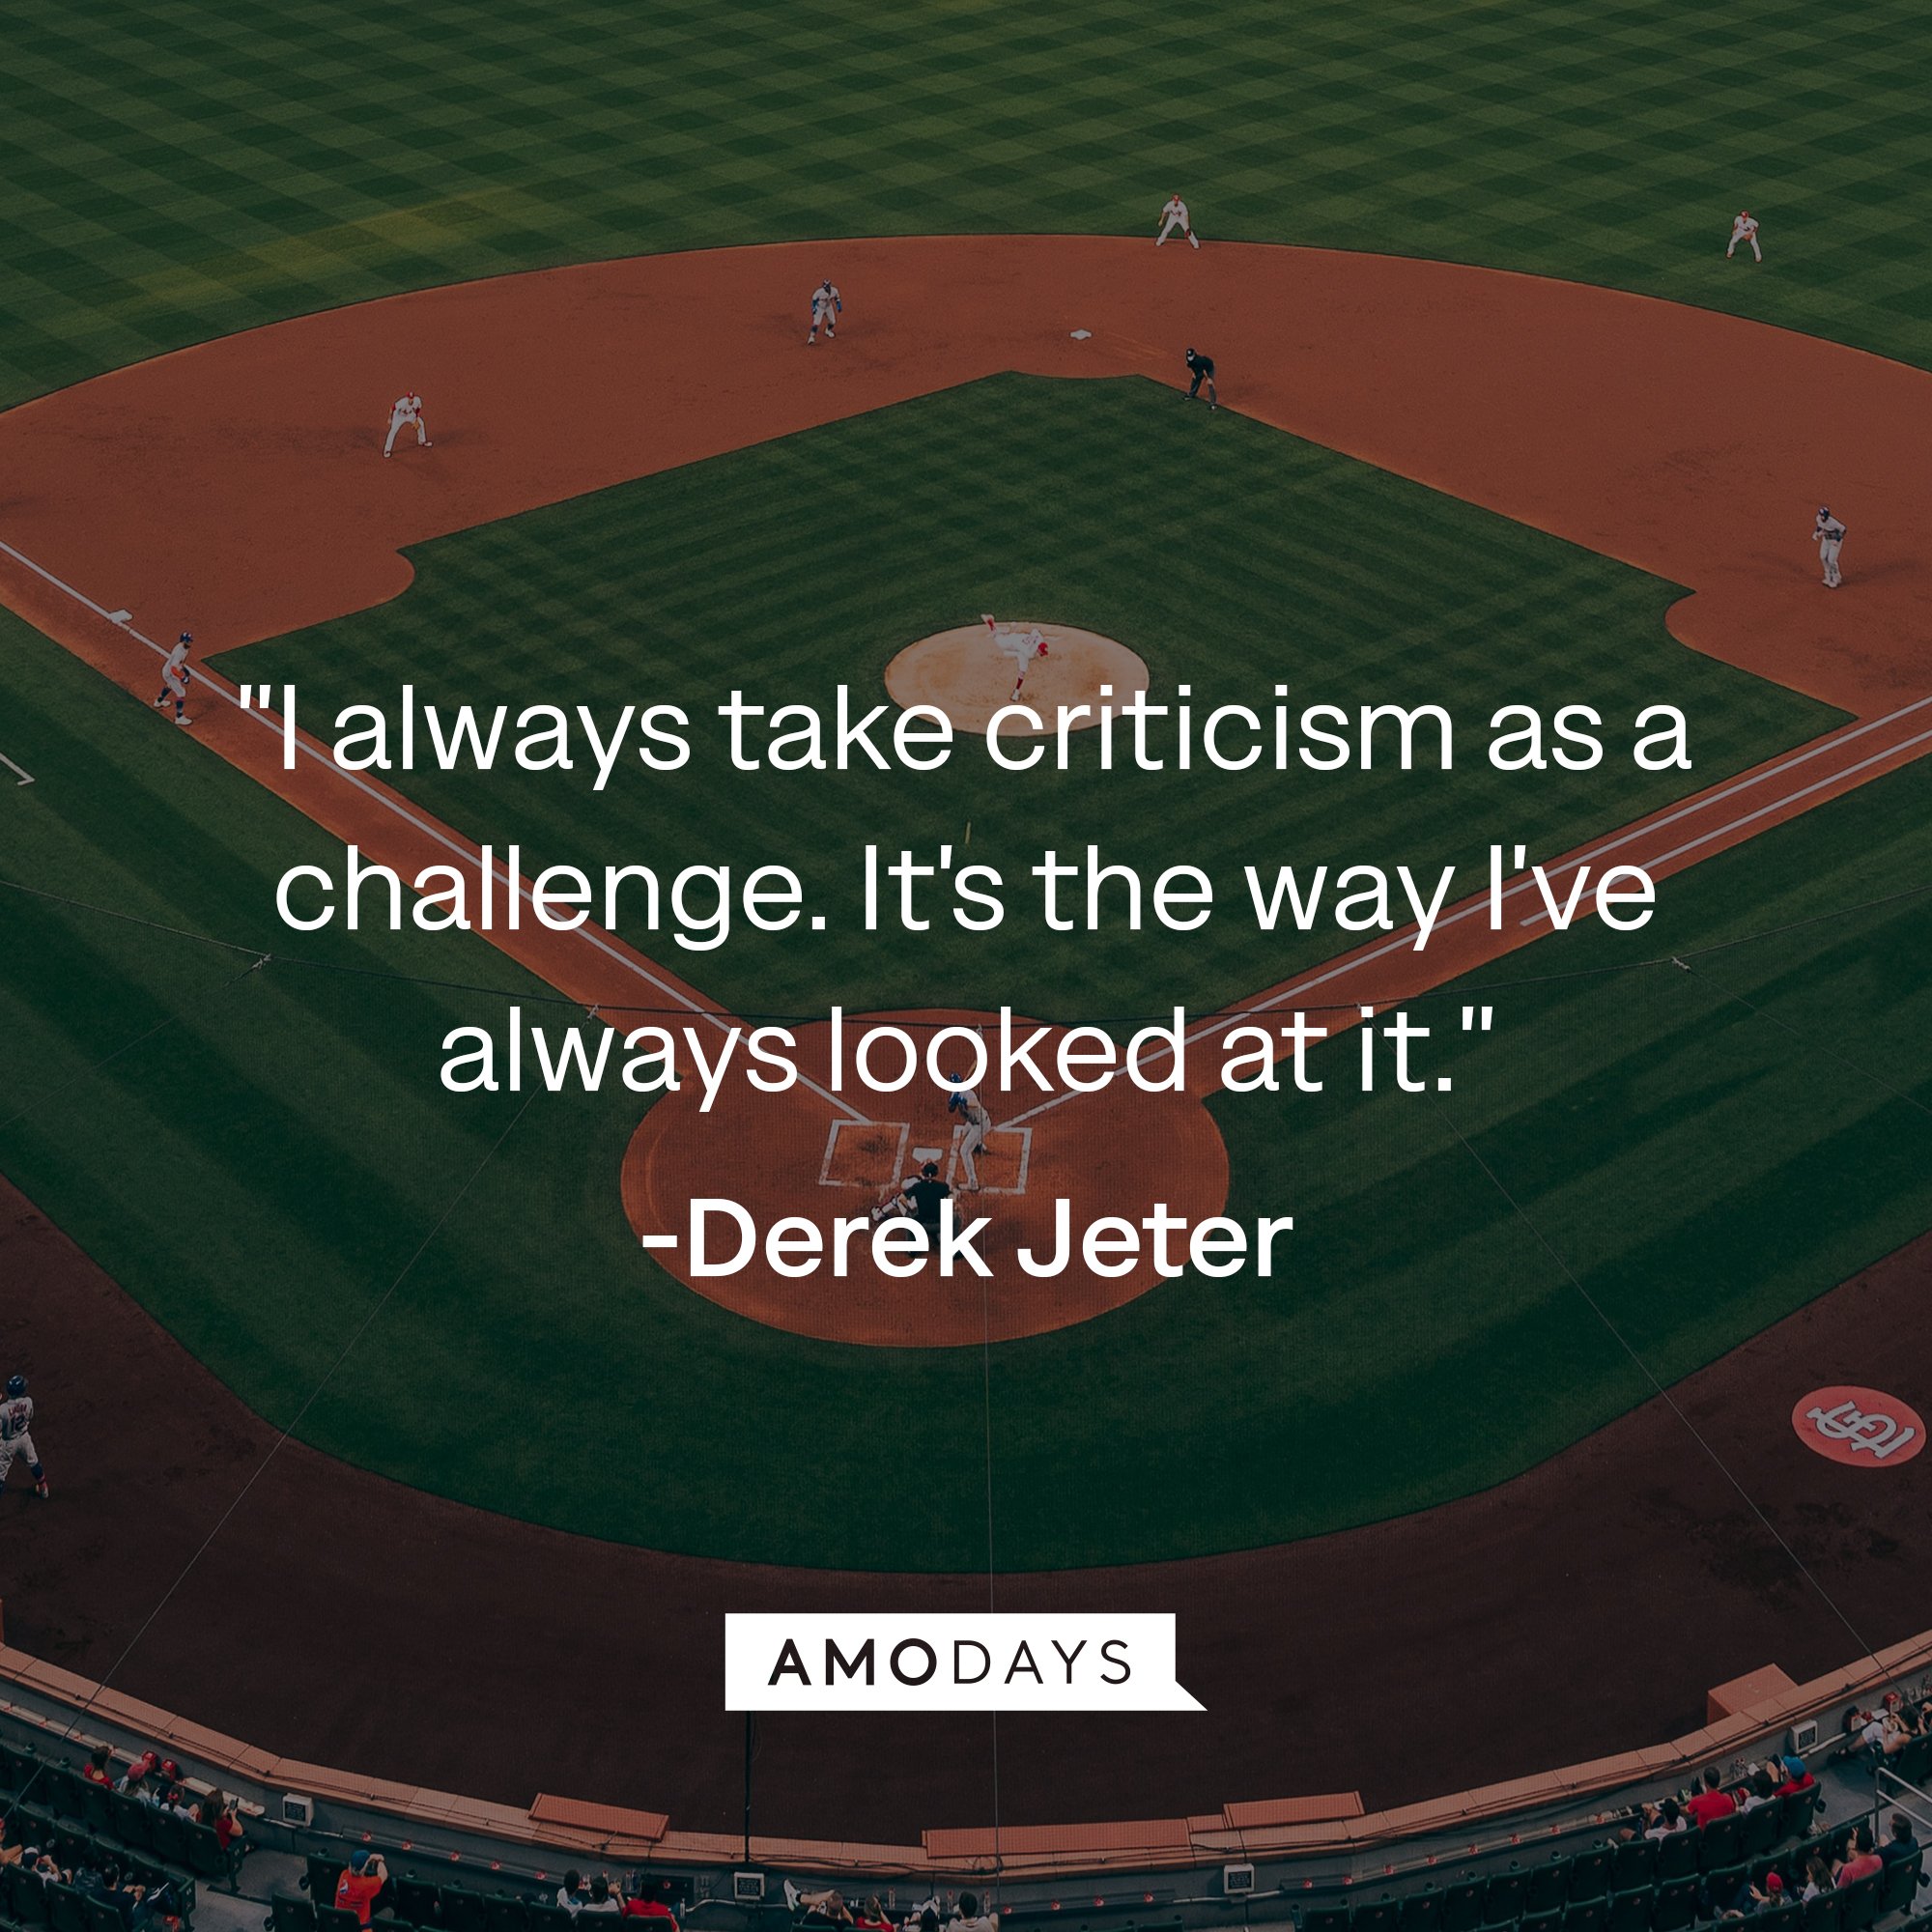 Derek Jeter's quote: "I always take criticism as a challenge. It's the way I've always looked at it." | Image: AmoDays